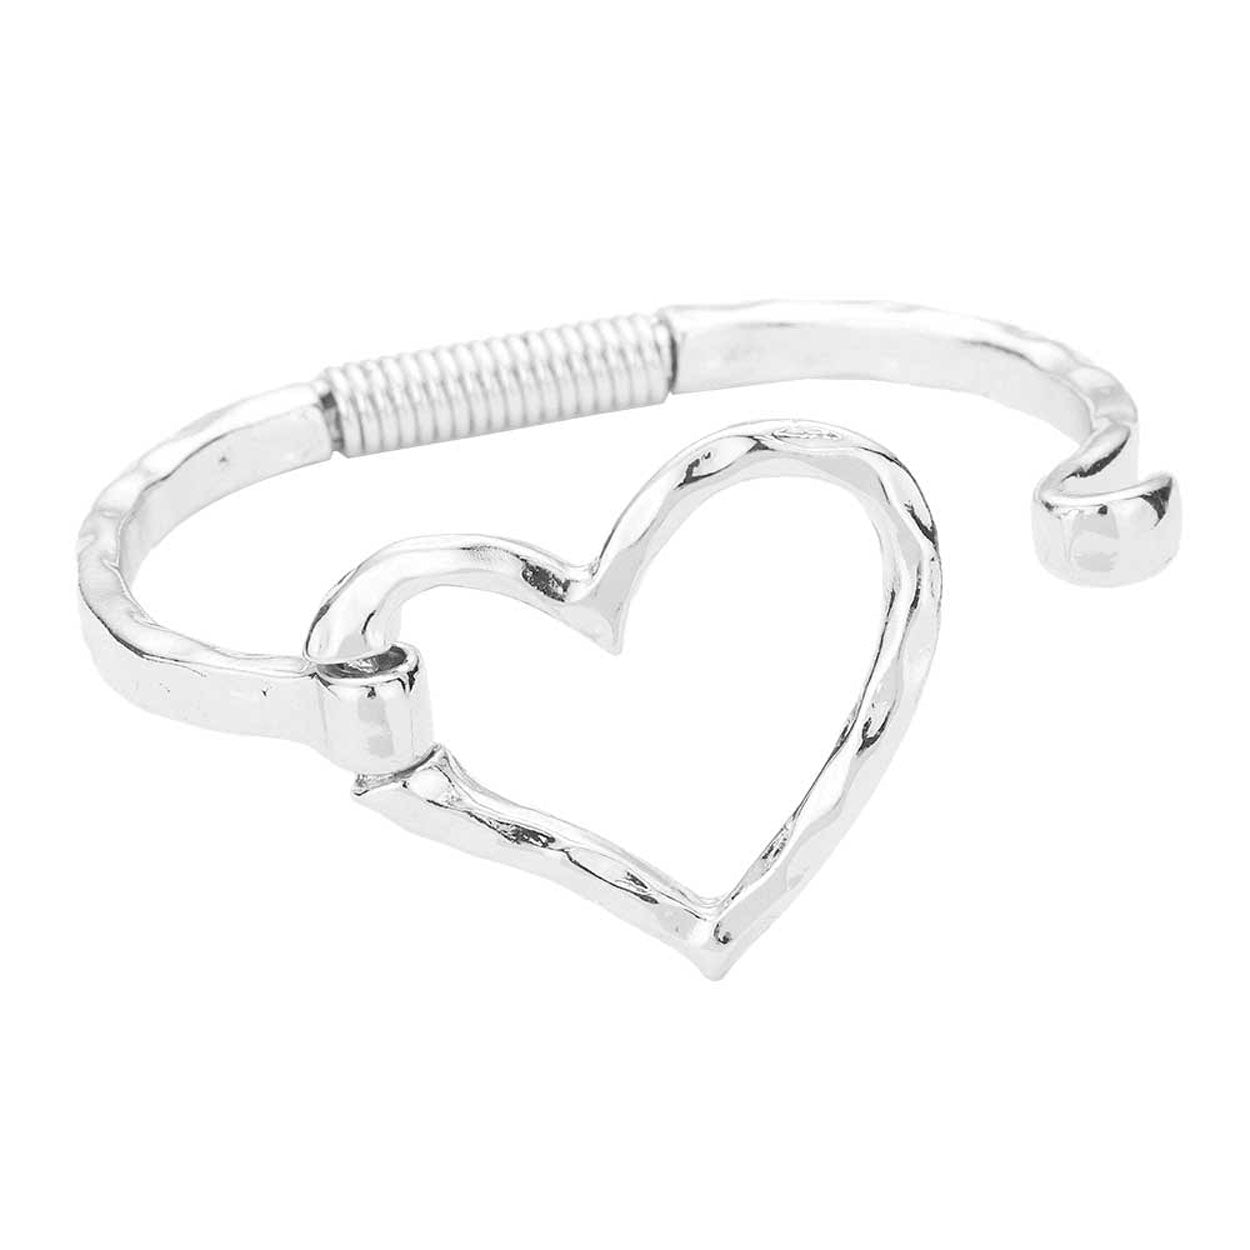 Rhodium Open Metal Heart Hook Bracelet. These Metal  bracelets are easy to put on, take off and so comfortable for daily wear. Pair these with tee and jeans and you are good to go. It will be your new favourite go-to accessory. Perfect Birthday gift, friendship day, Mother's Day, Graduation Gift or any other Special occasion.